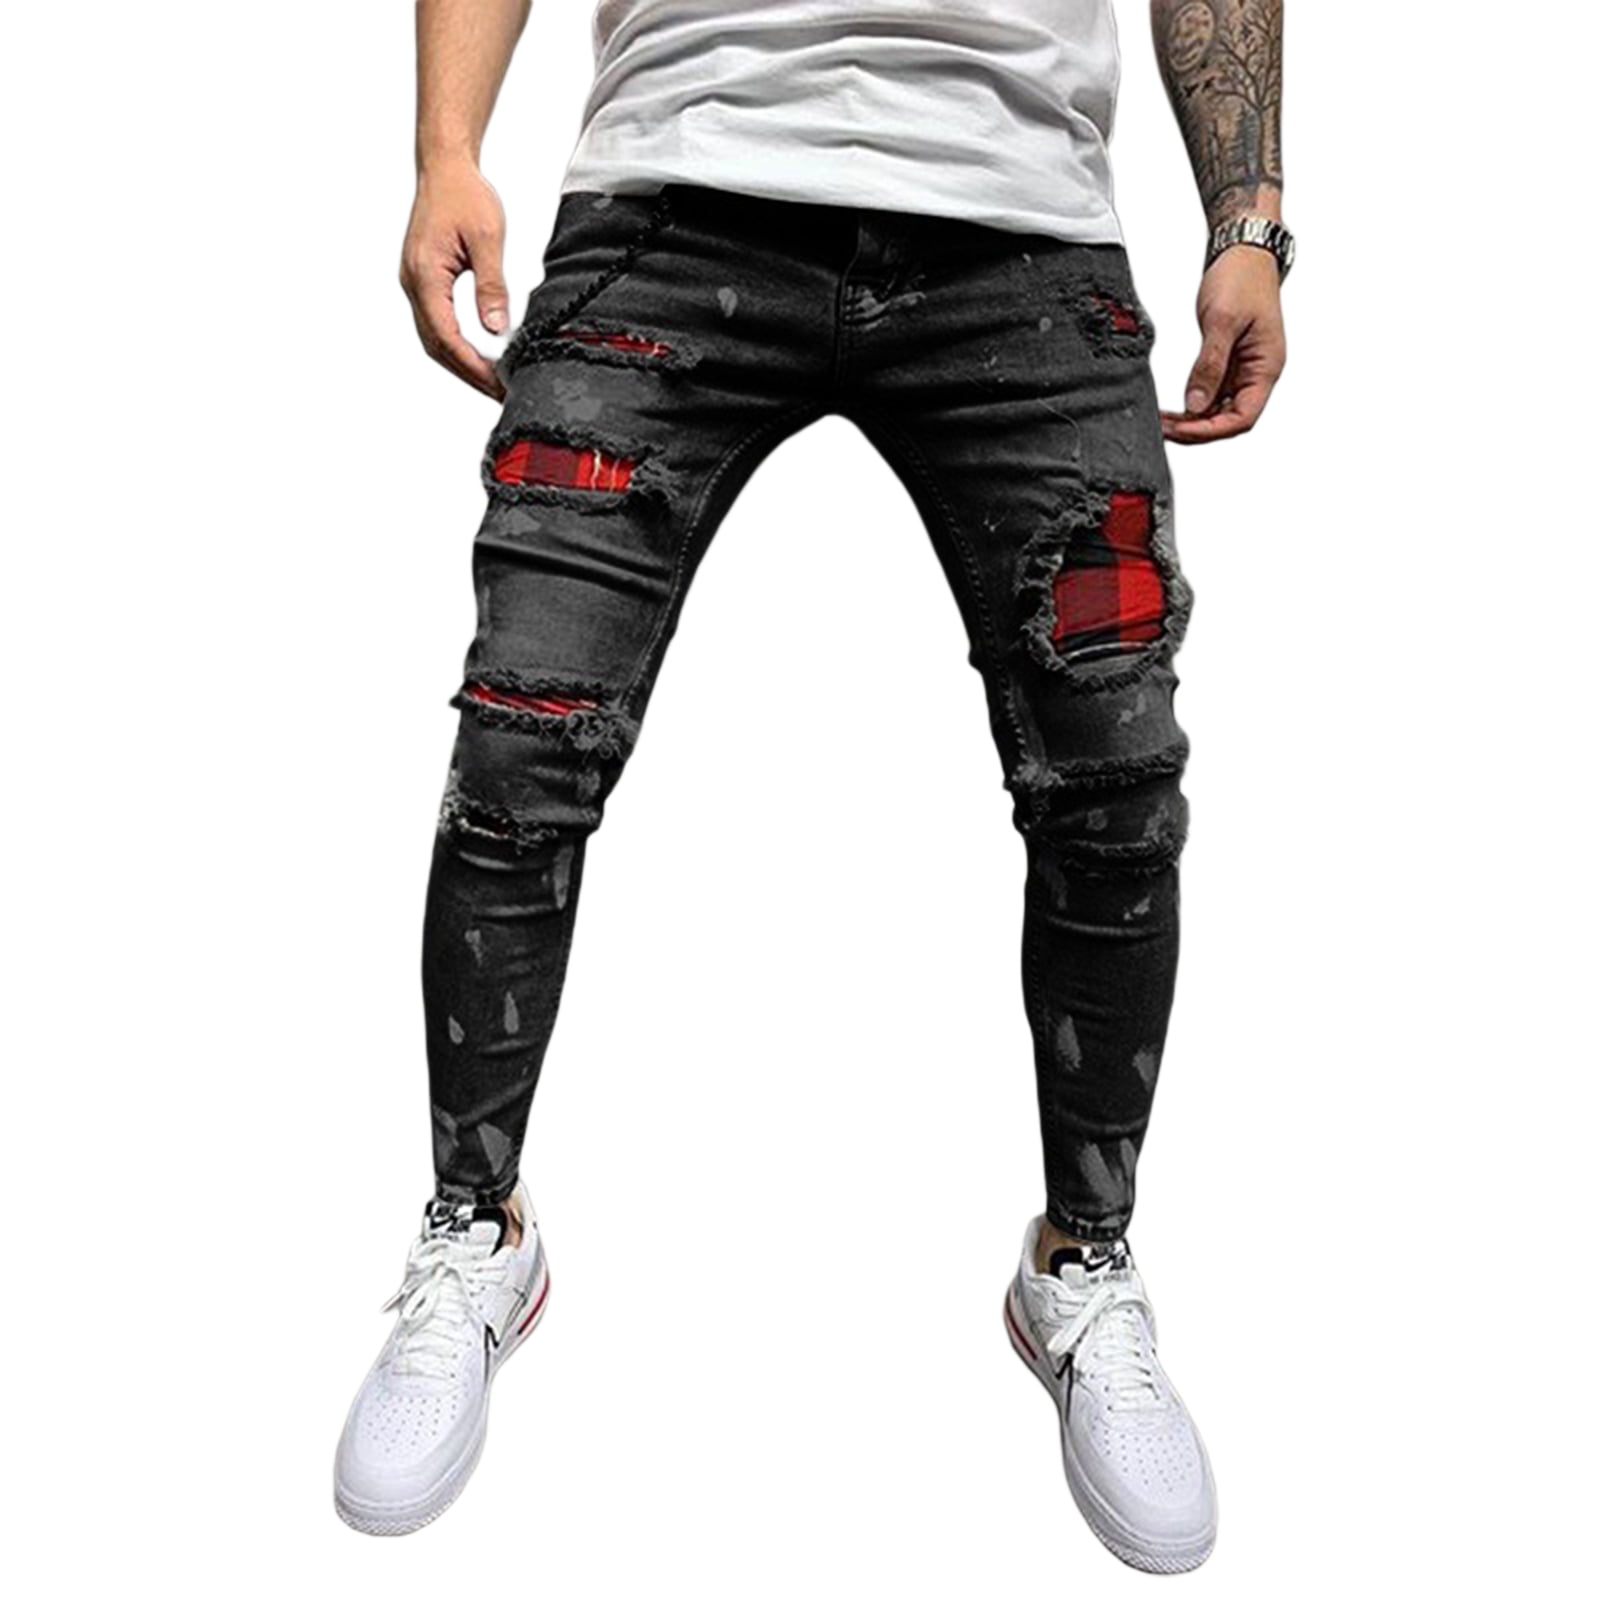 Men's Tattered Ripped Black Jeans Pants 5509# | Shopee Philippines